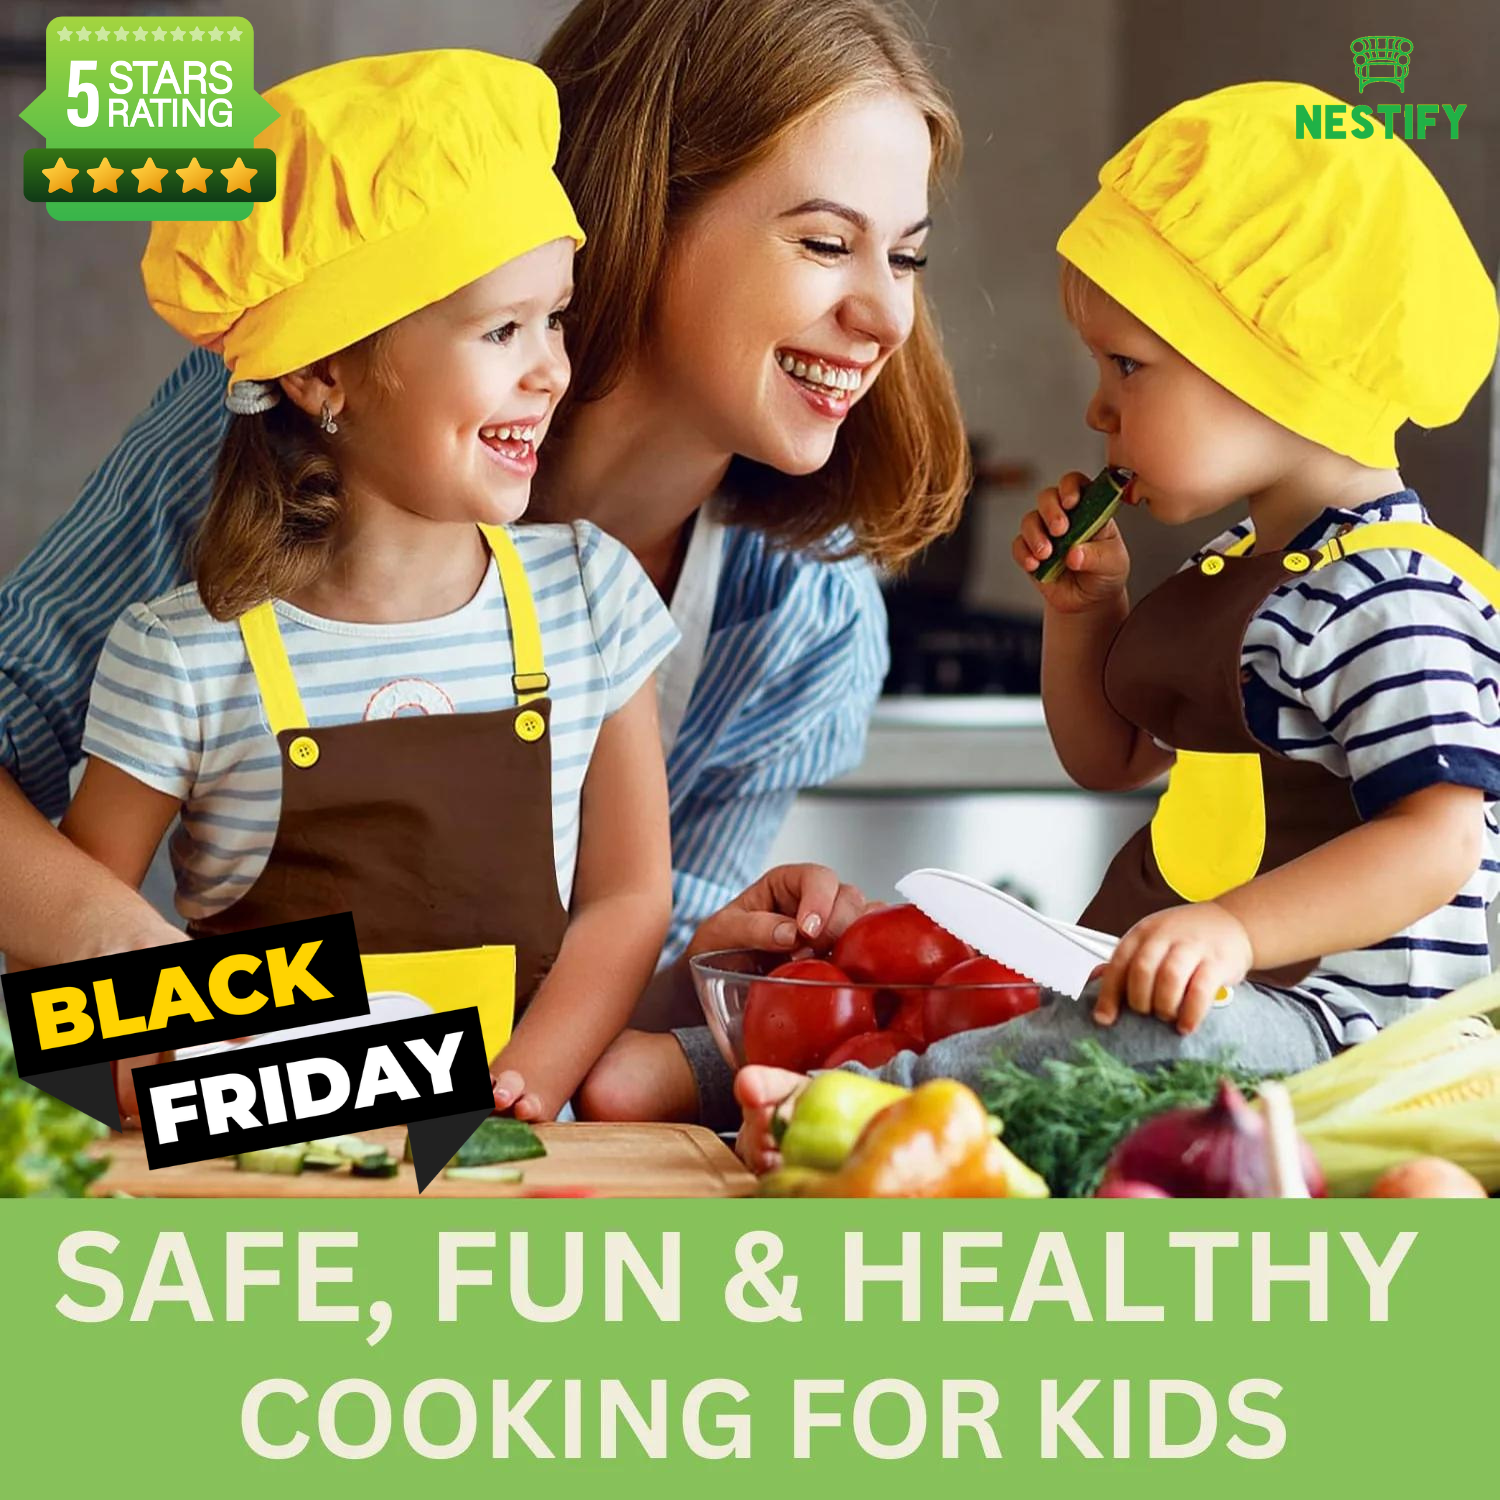 KidCulinary Kitchen Set: The Best Kitchen Experience For Kids!